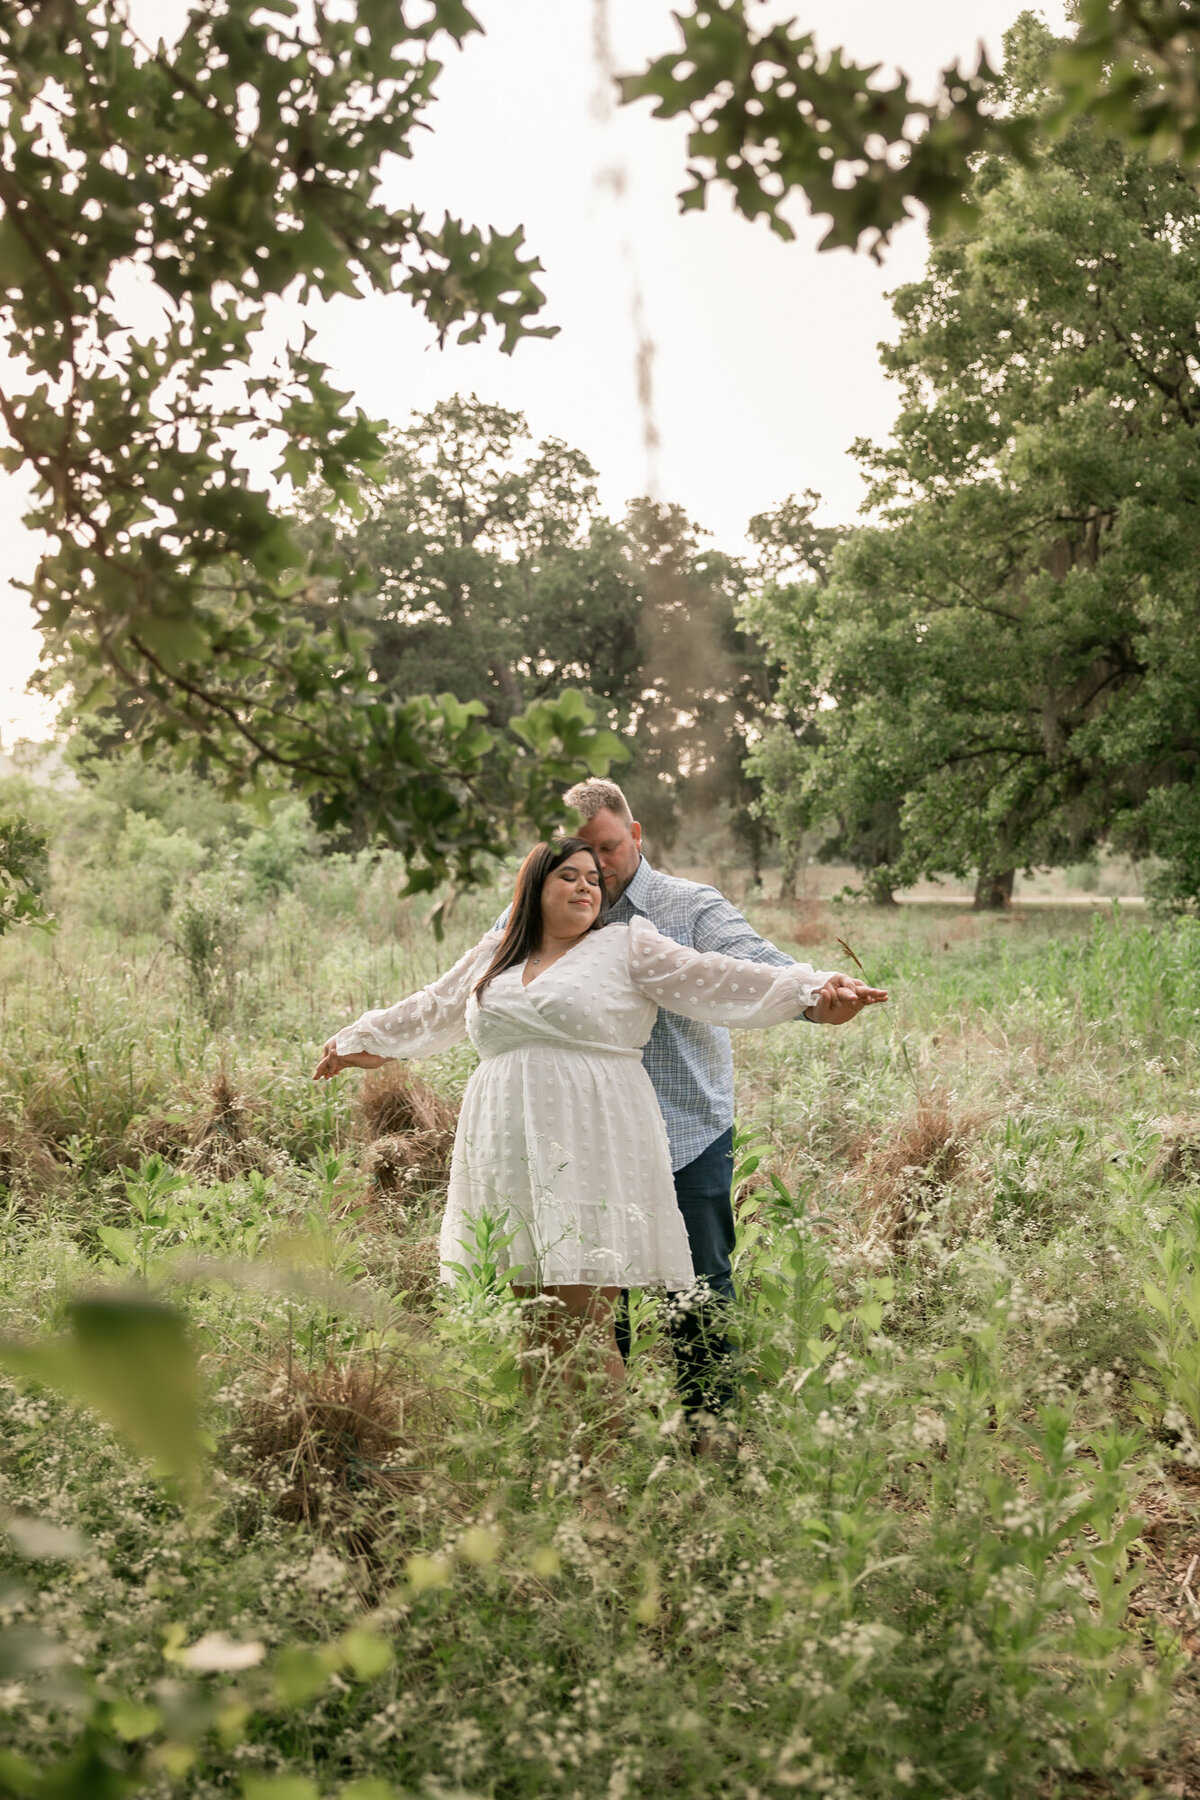 bride and groom sway in a field of grass, while she wears a white engagement dress and he snuggles her.